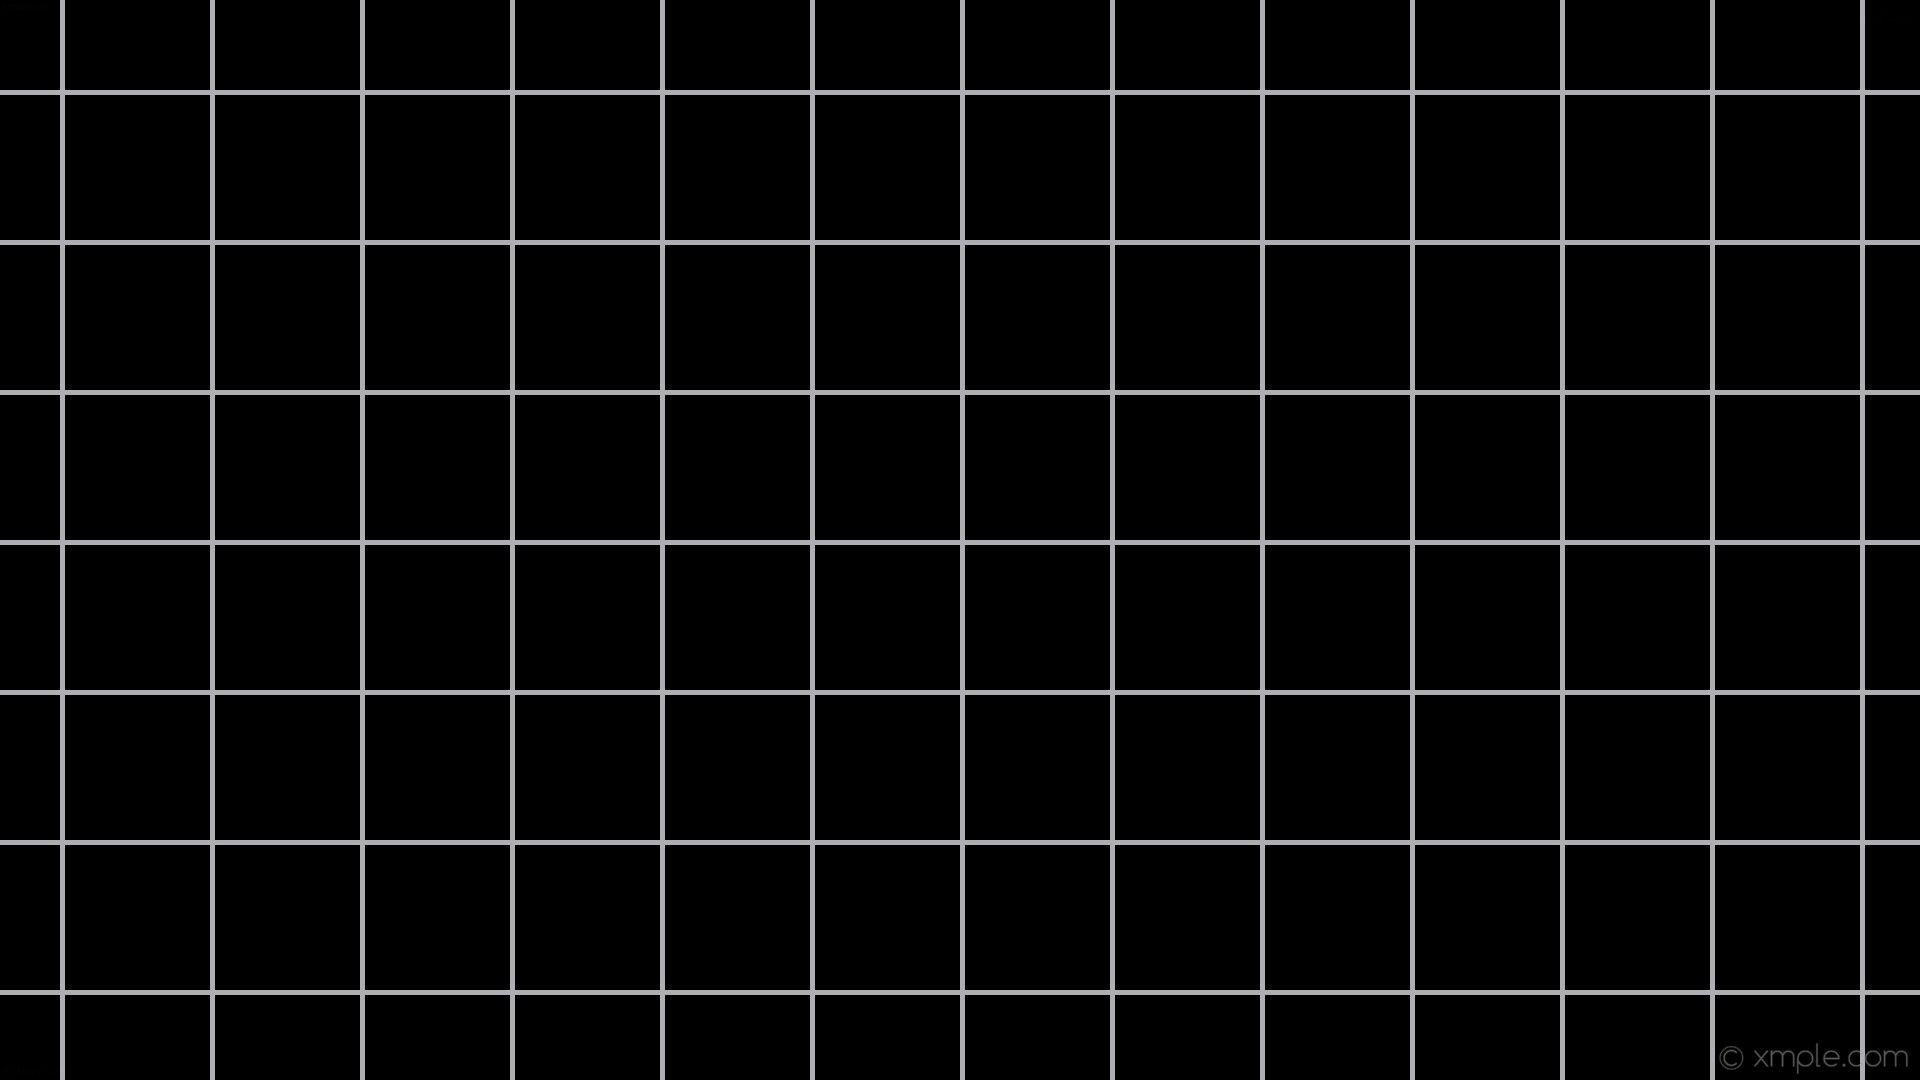 A black and white square with squares - Grid